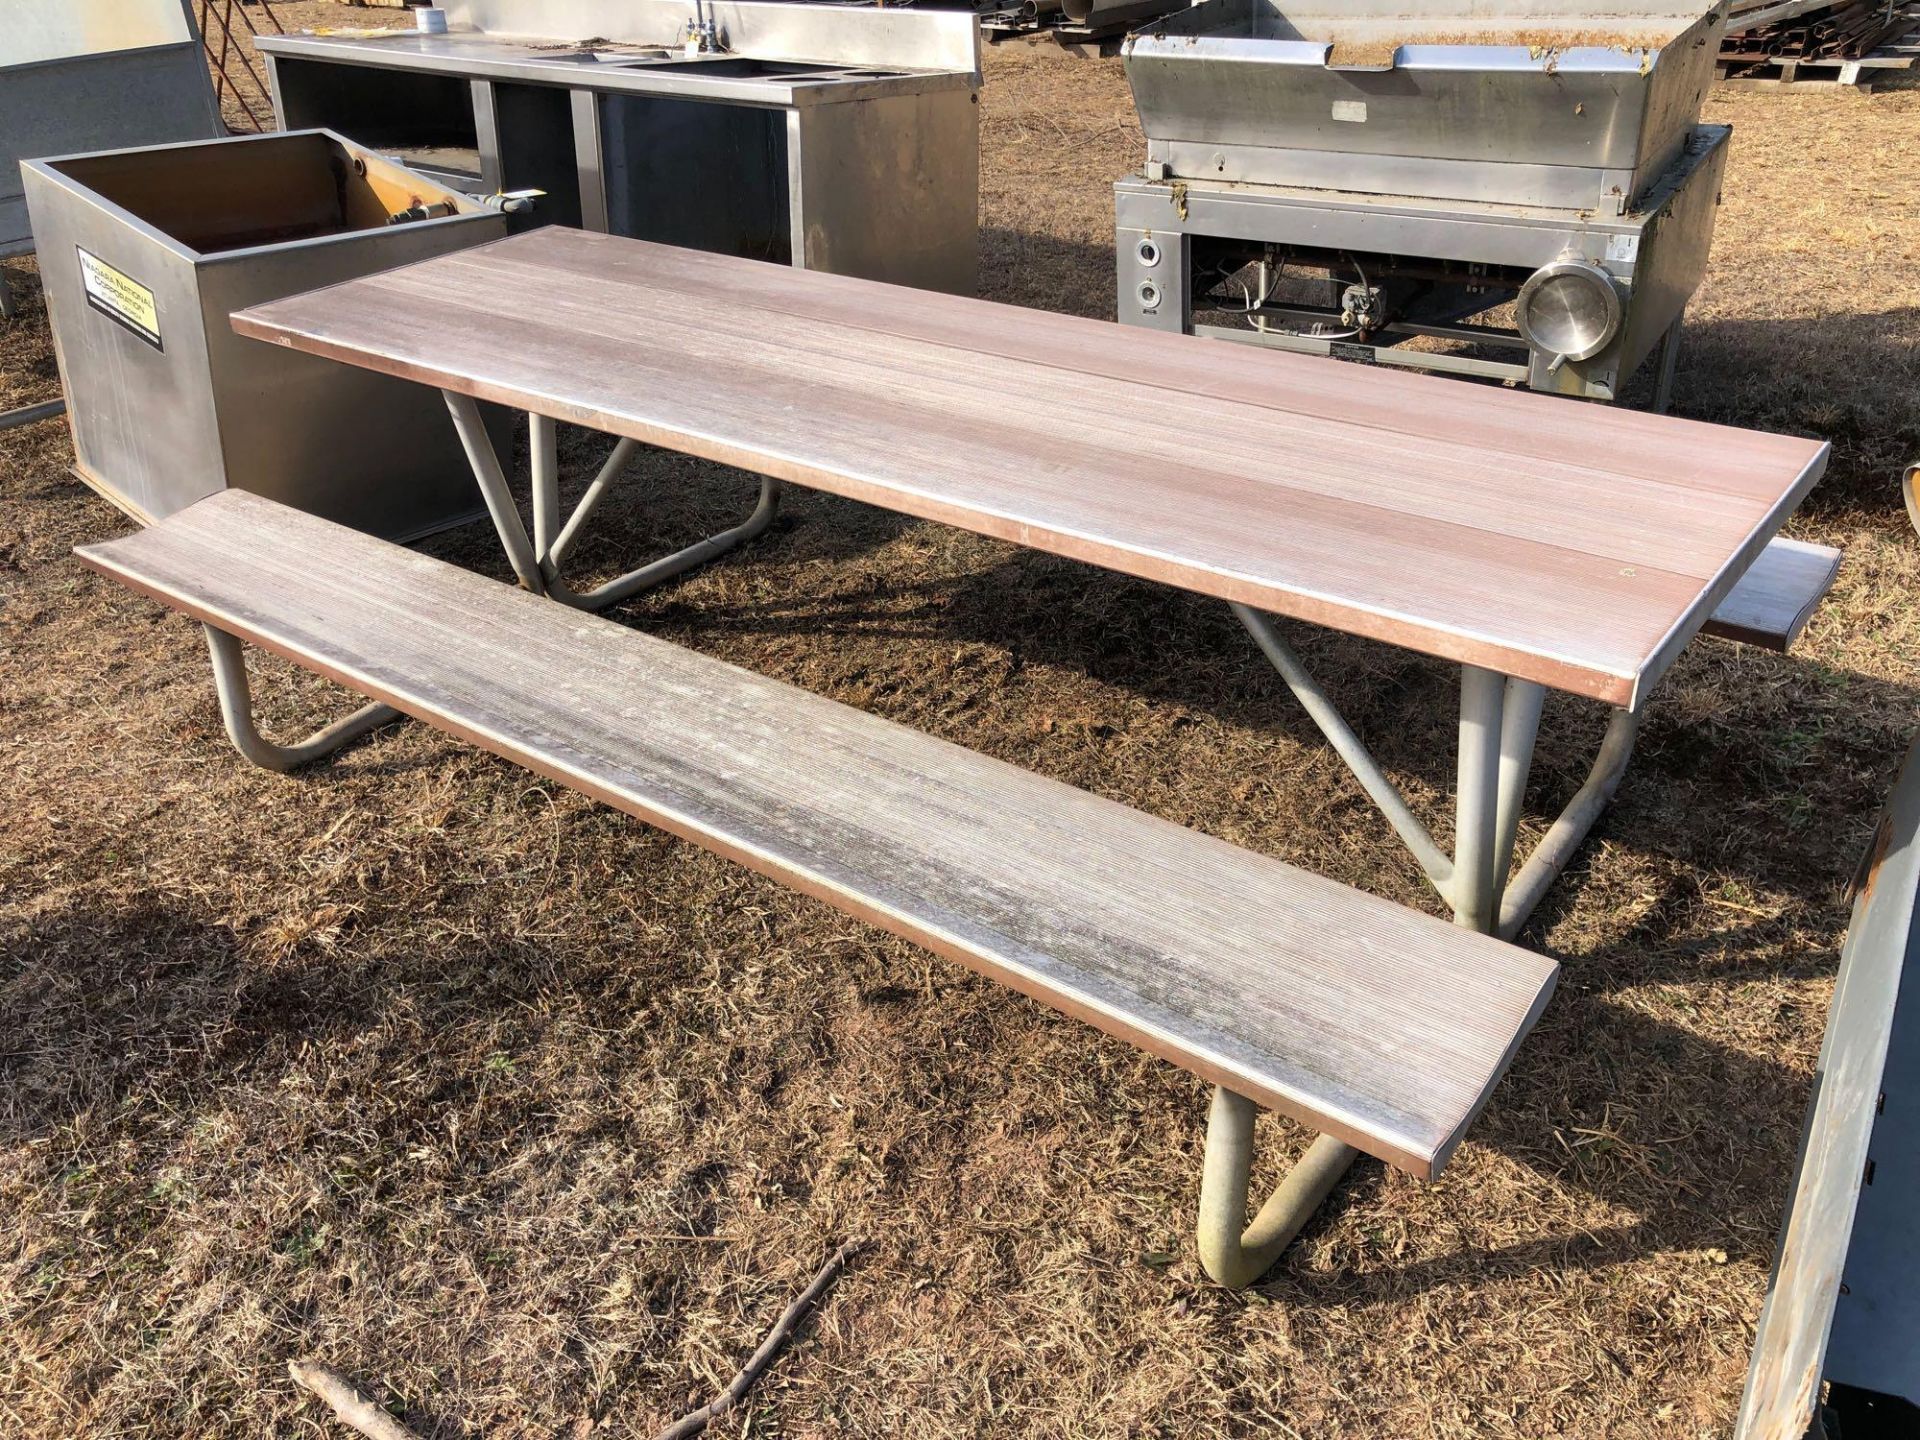 8ft Aluminum Picnic Table - Image 3 of 4